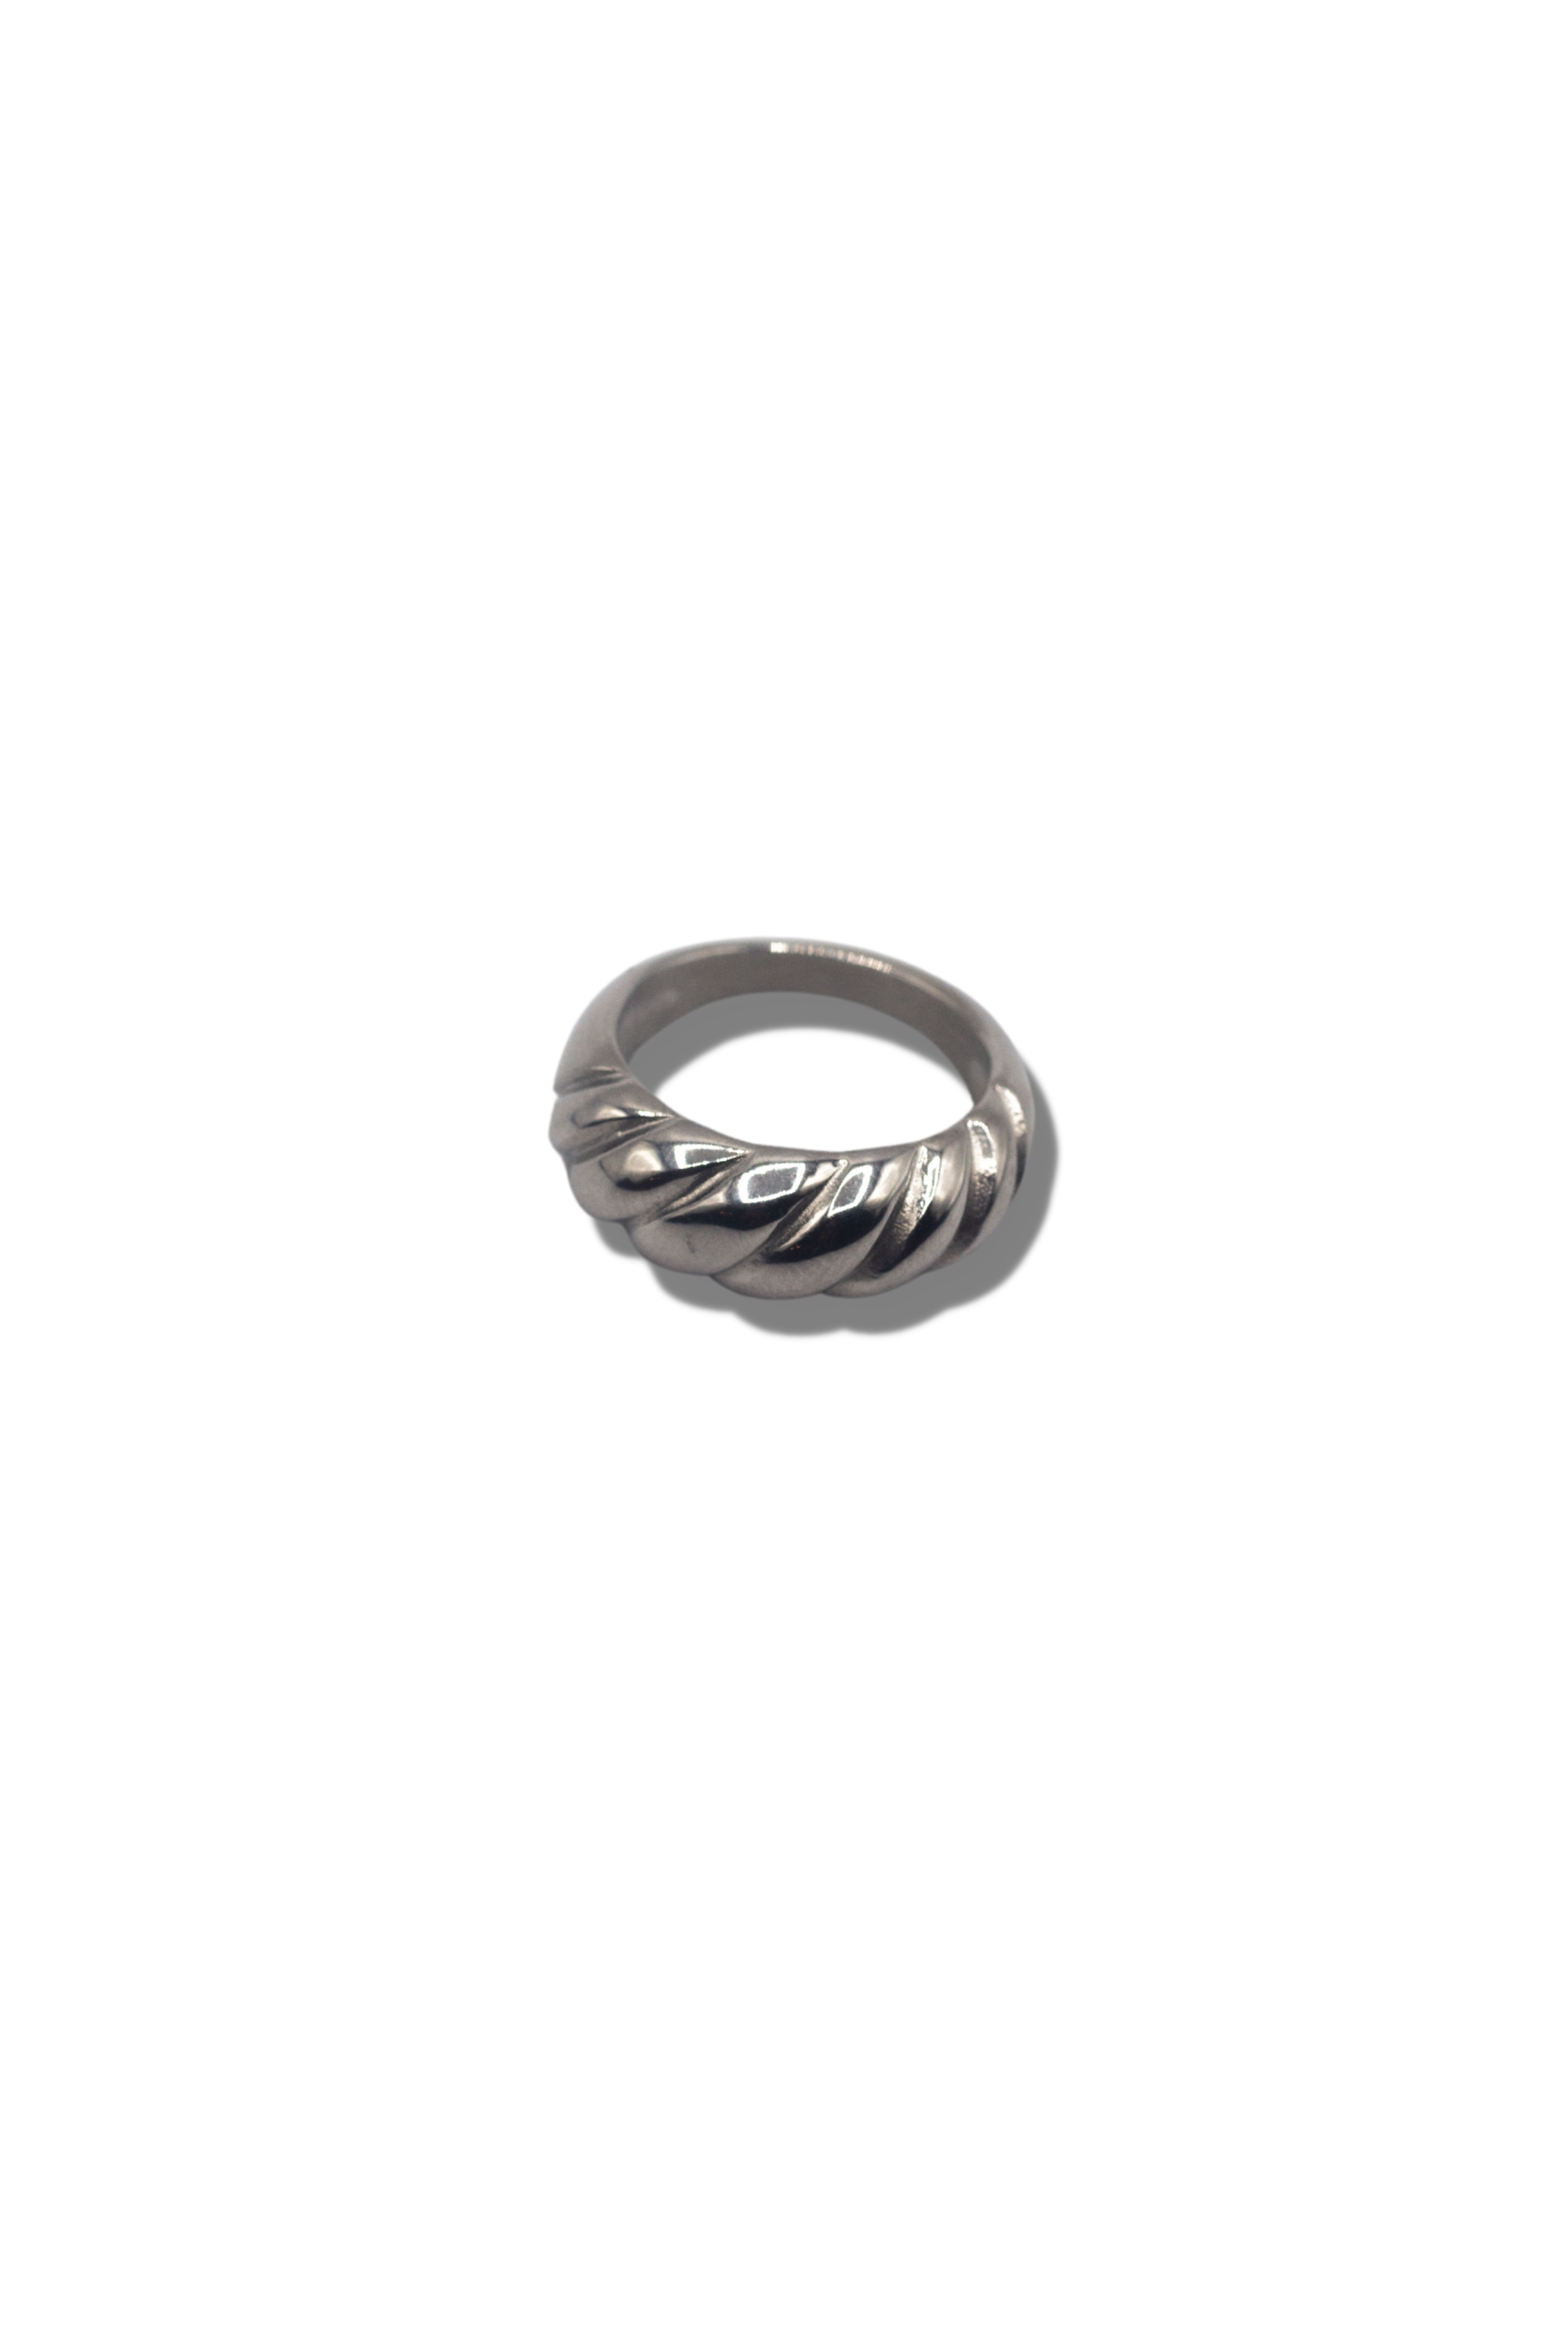 18k silver croissant shaped ring. Thick Croissant Rings by E's Element.